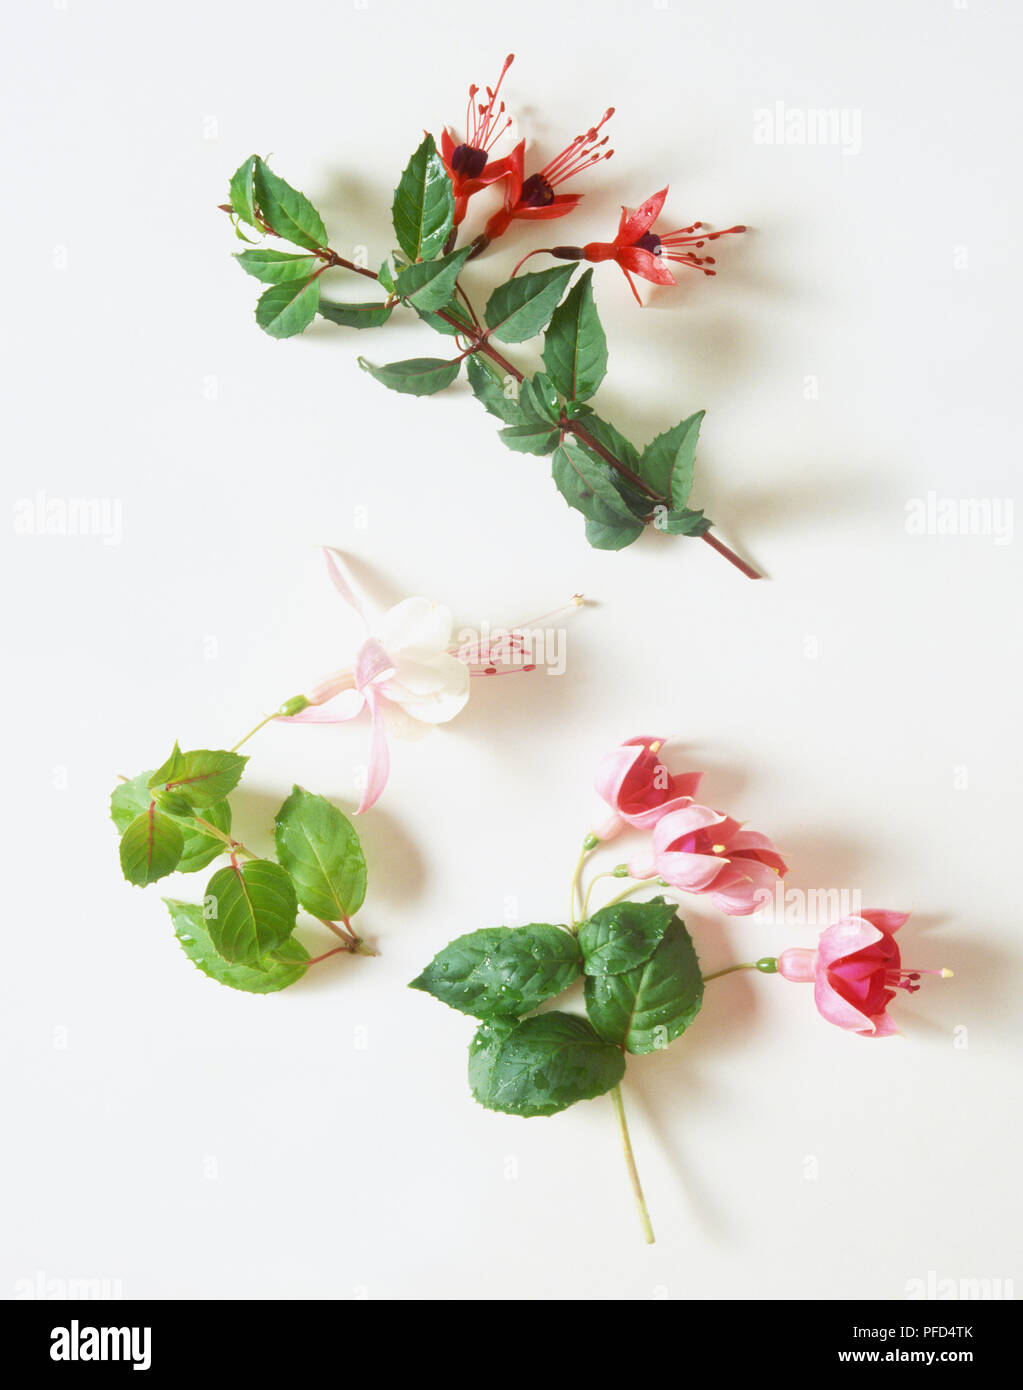 Wild Fuchsia (red) and Cultivated Fuchsia (pink and white) Stock Photo